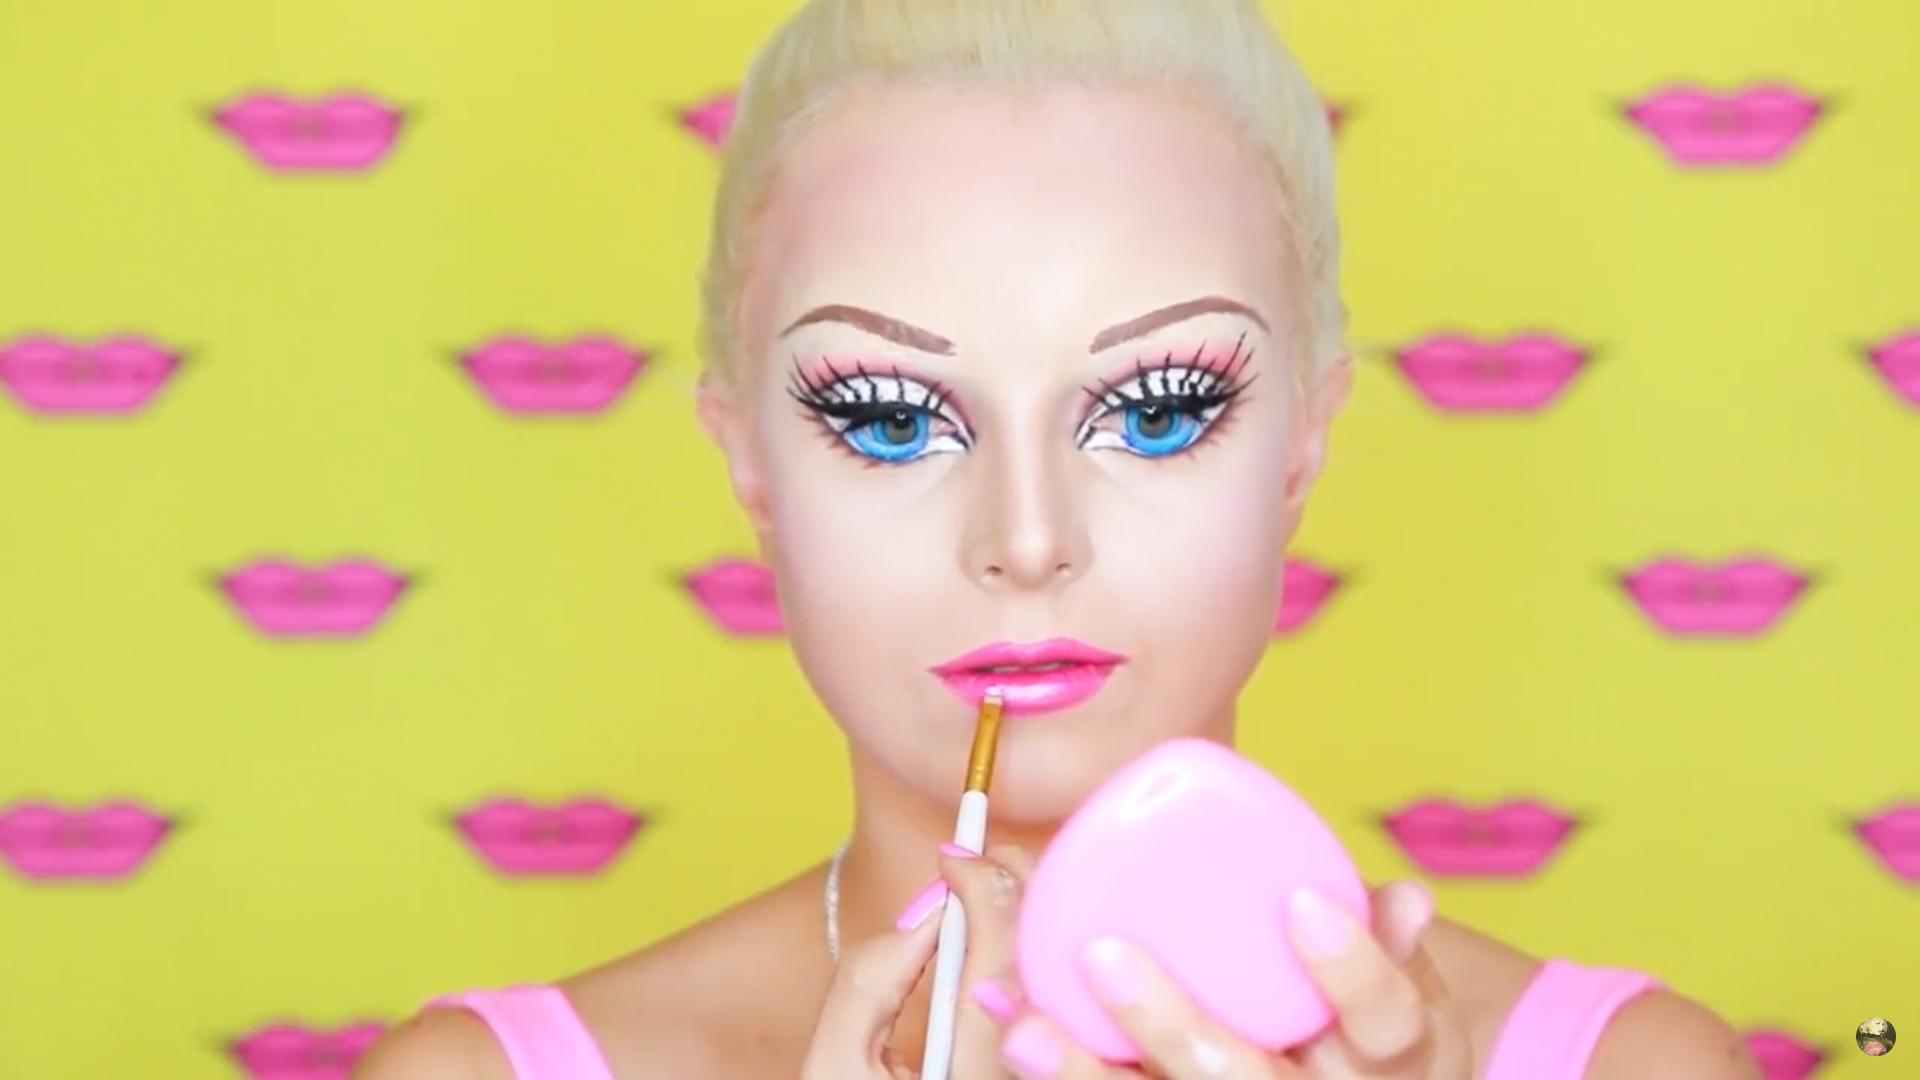 Barbie Makeup Tutorial Is Scary Accurate RTM RightThisMinute